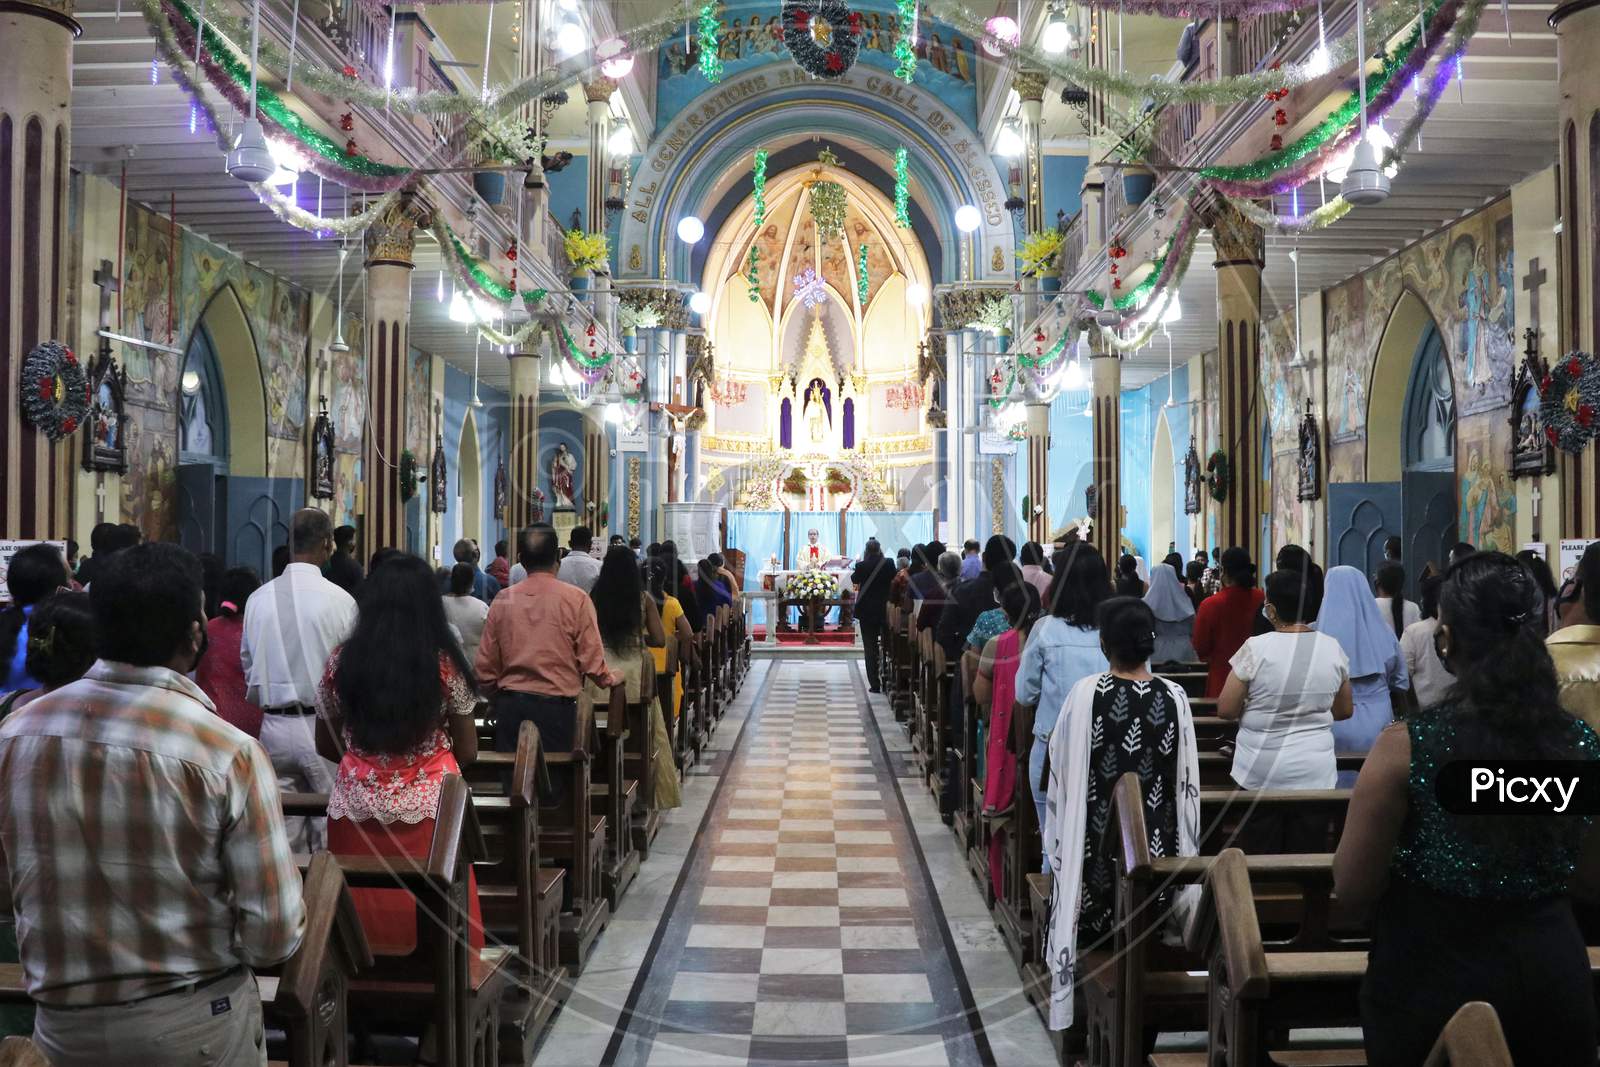 People attend mass as members of India's Christian community celebrate Christmas eve in Mumbai, India, December 24, 2020.